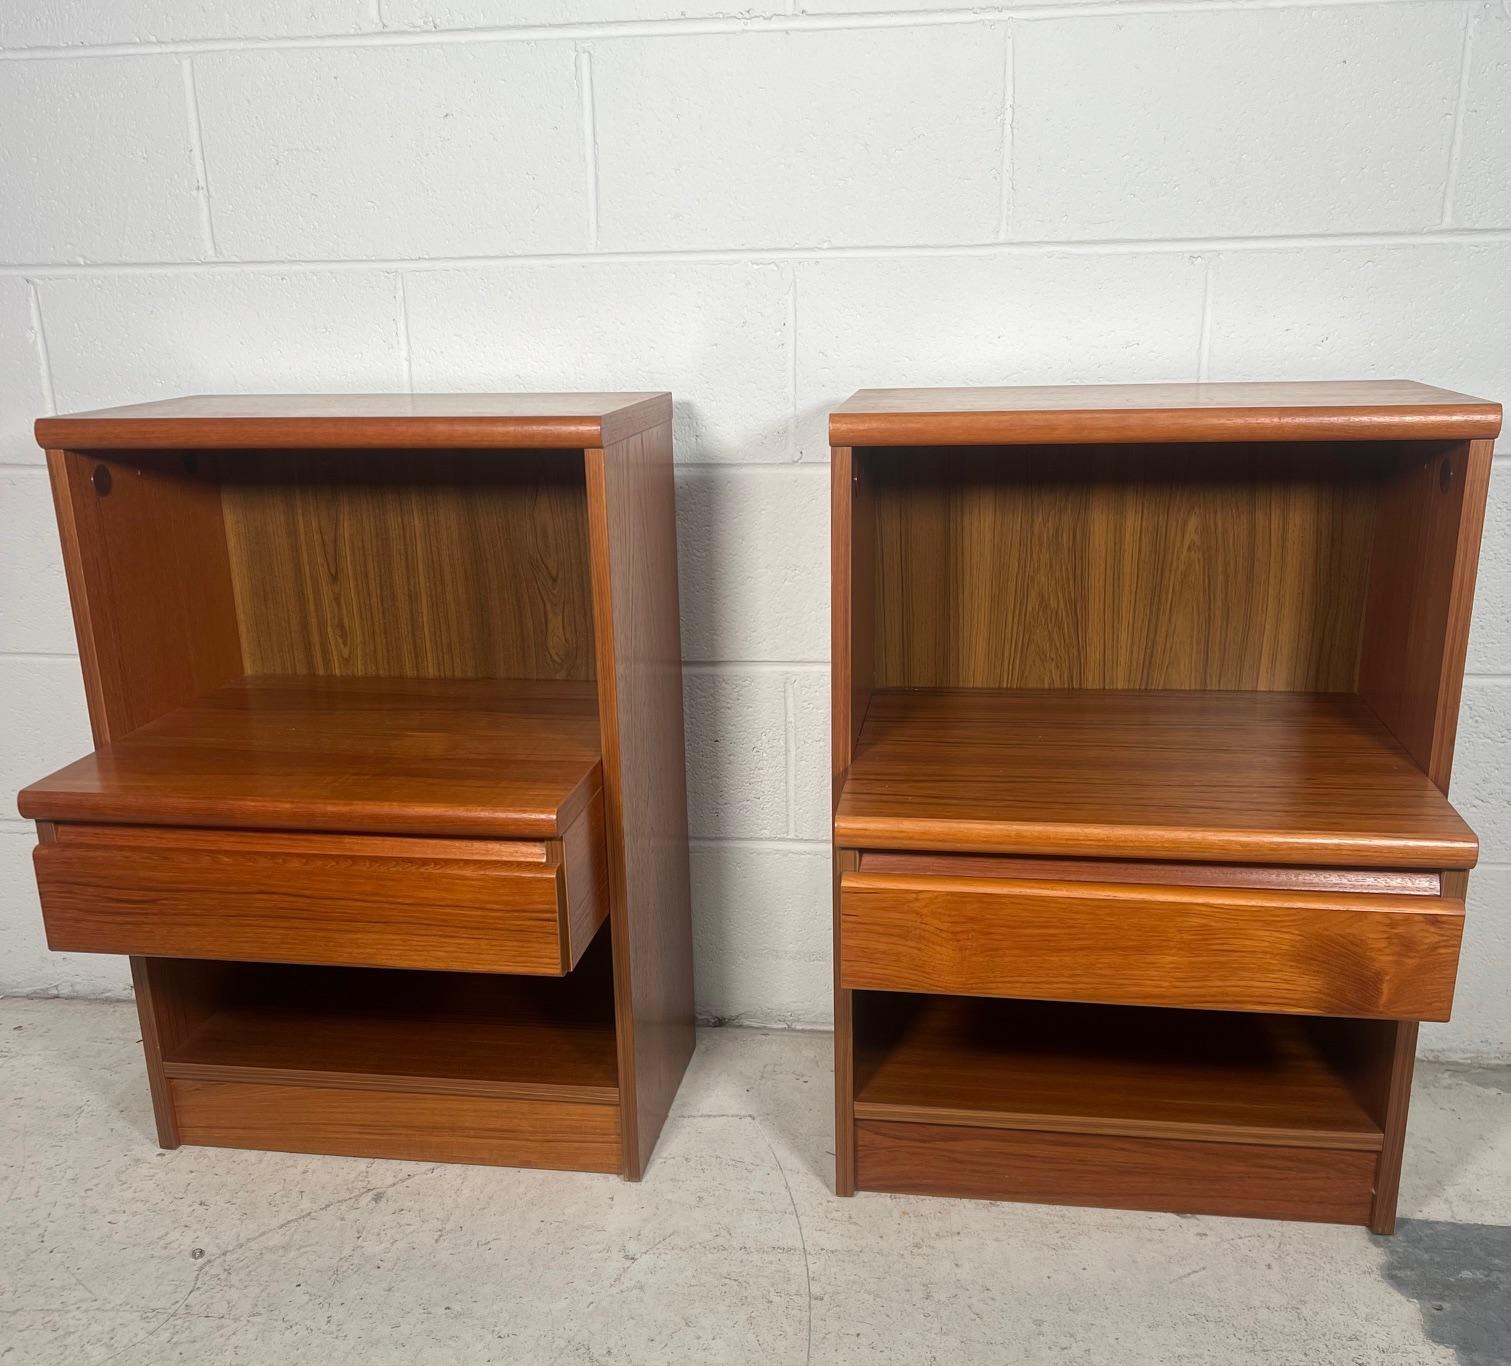 This is a pair of Danish teak veneer night stands with drawer. Circa 1980.
They are in very good vintage condition. Minor signs of wear.
Dimensions: L x D x H
20